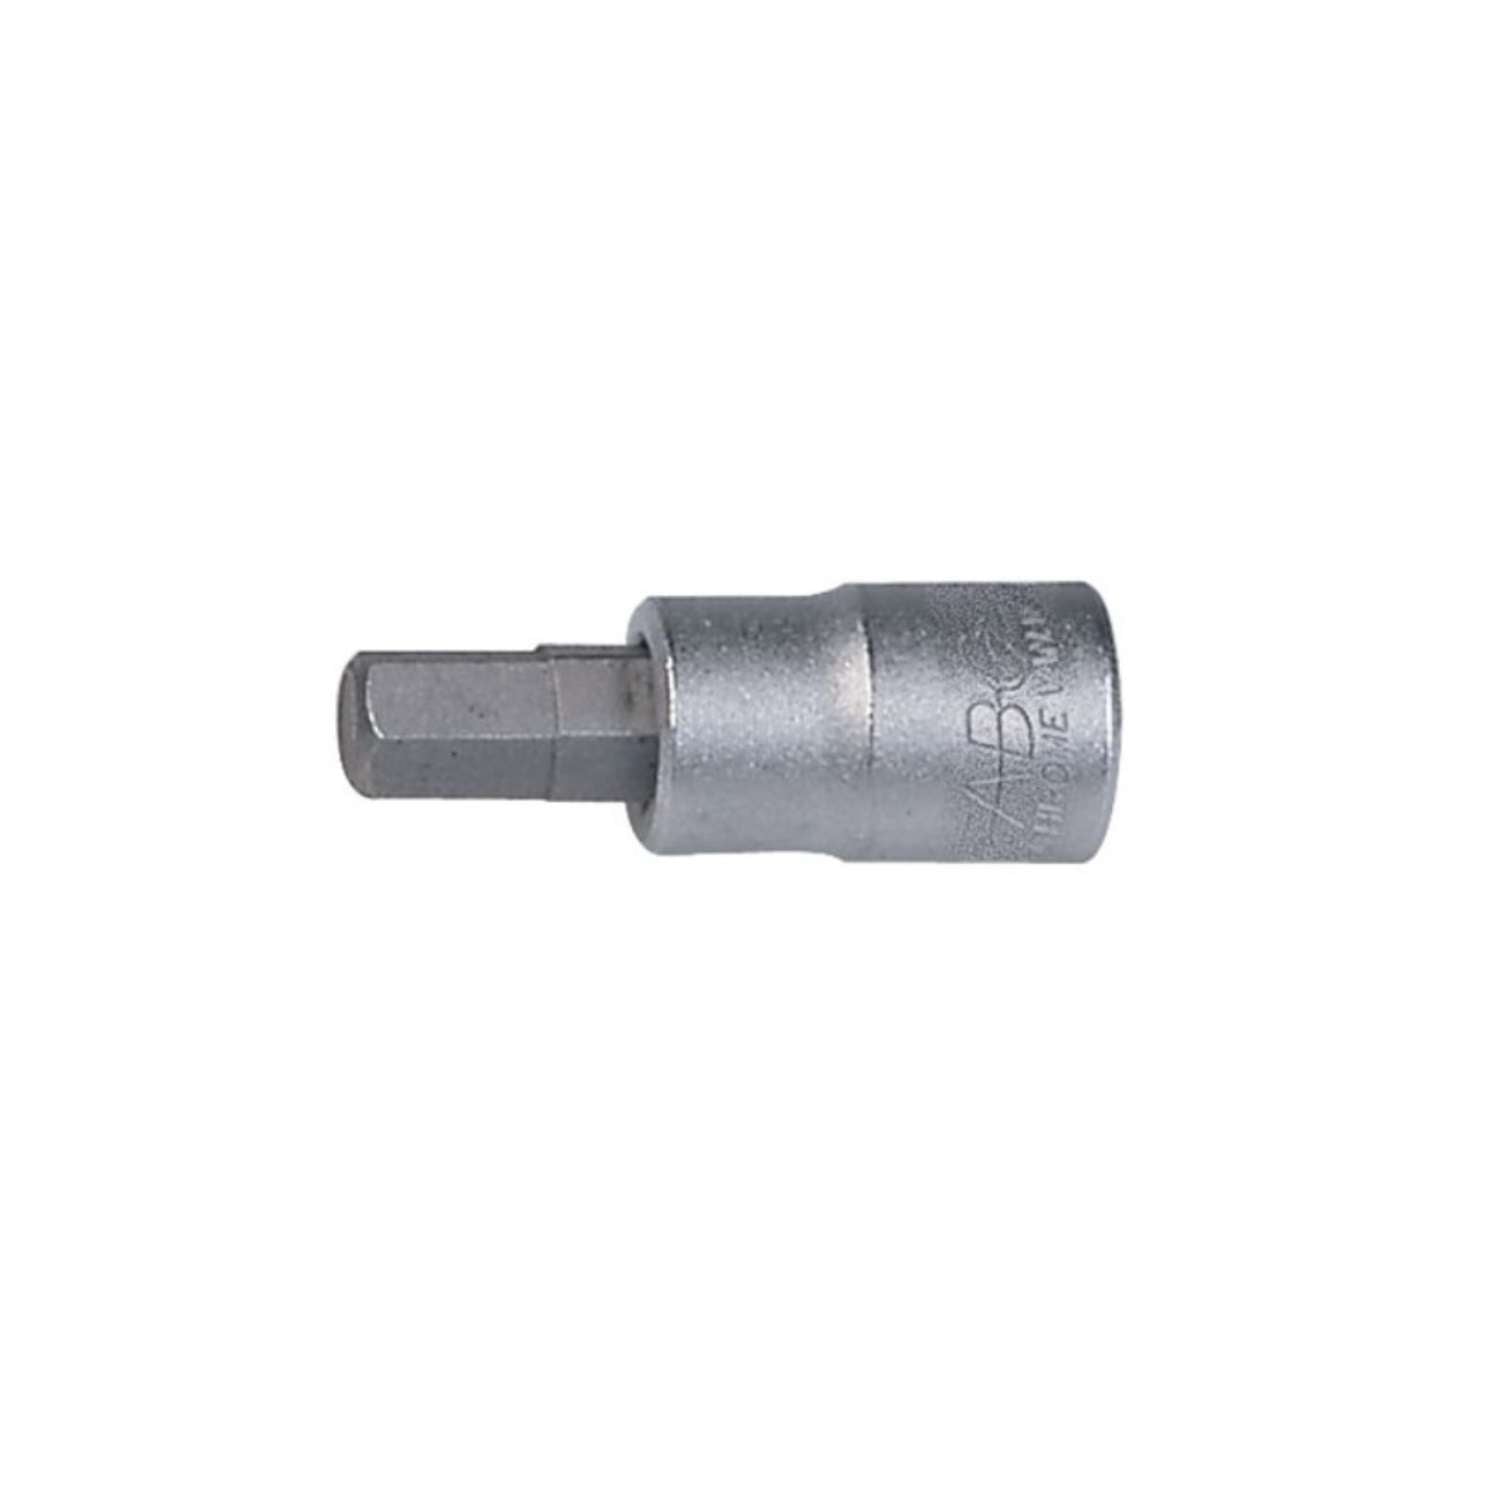 Sockets with 1/4" socket insert 2.5 to 8 mm A 3112/91 ABC series